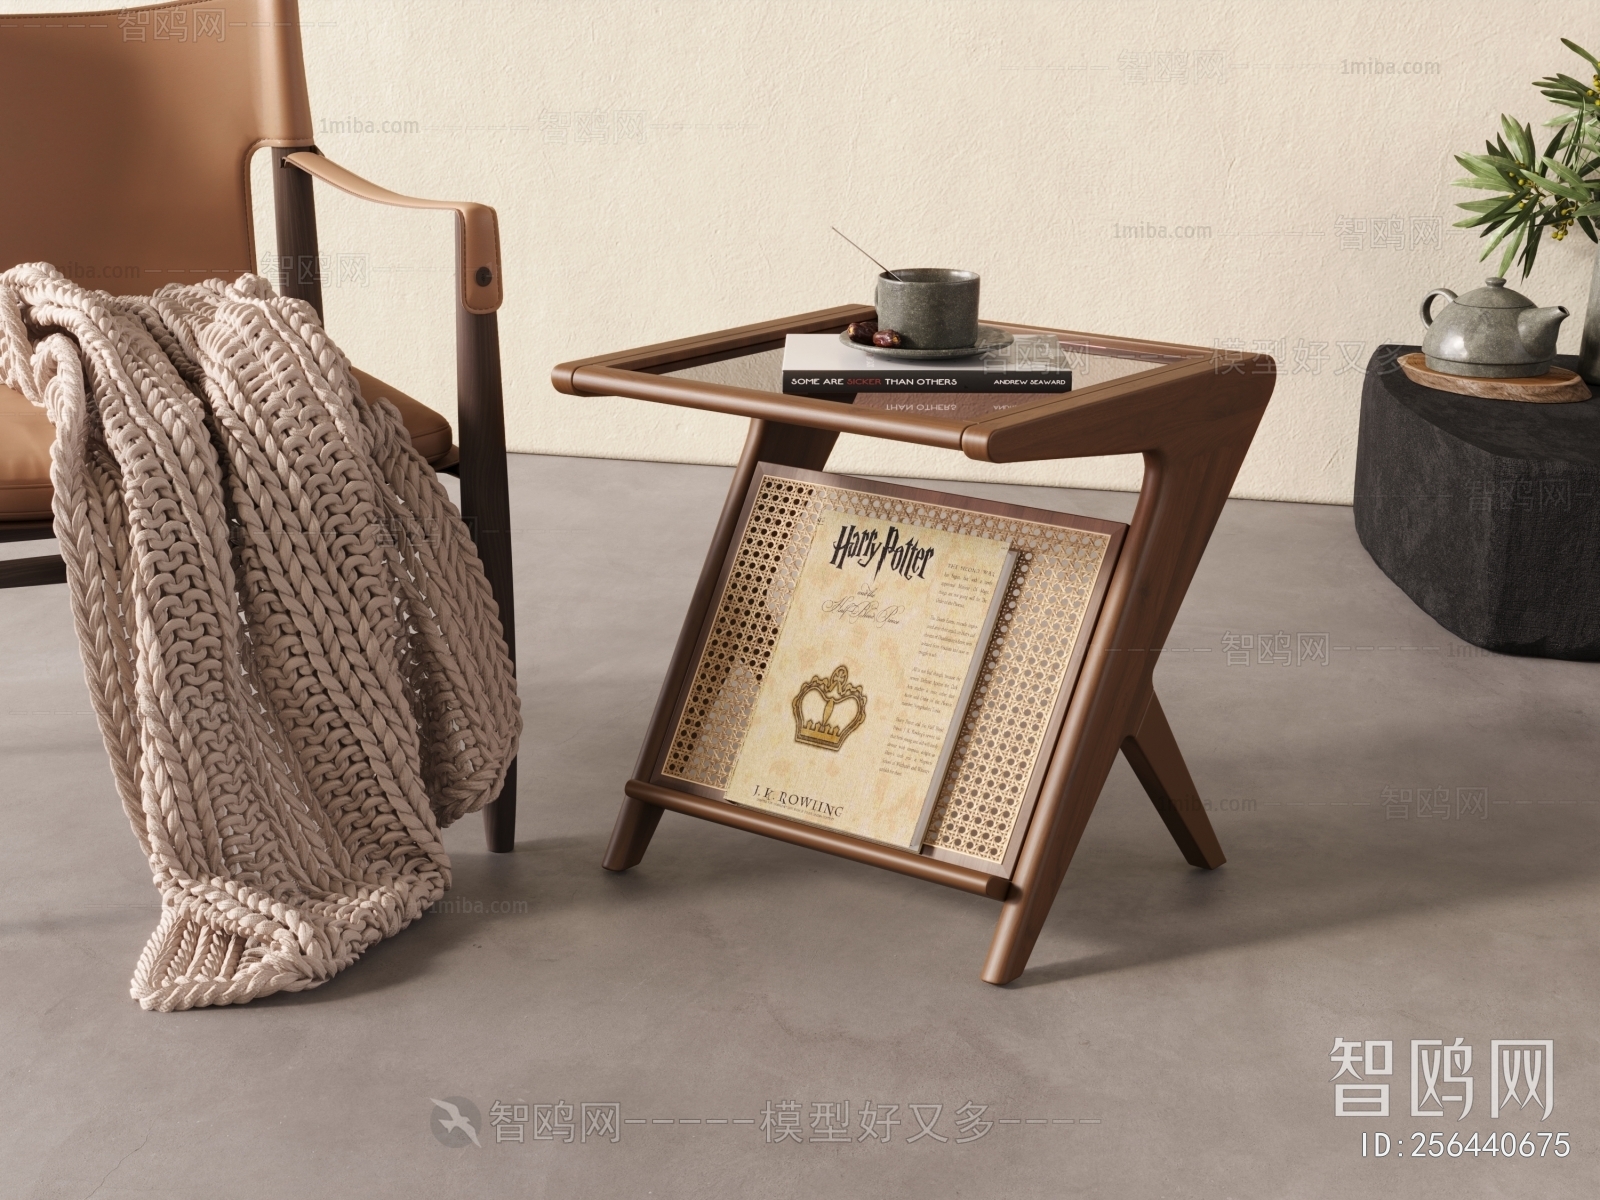 Chinese Style Side Table/corner Table